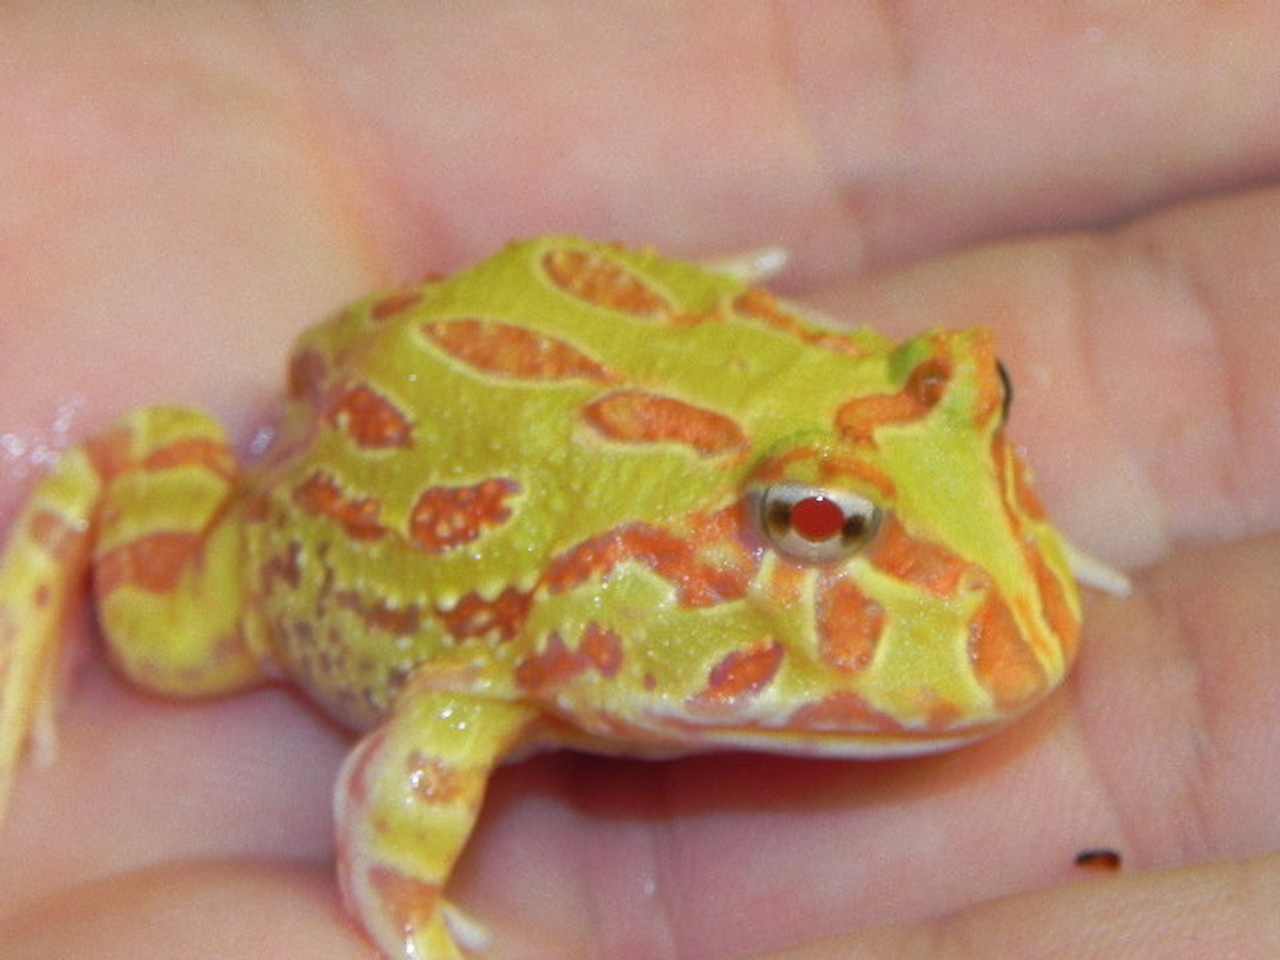 strawberry pineapple pacman frog for sale